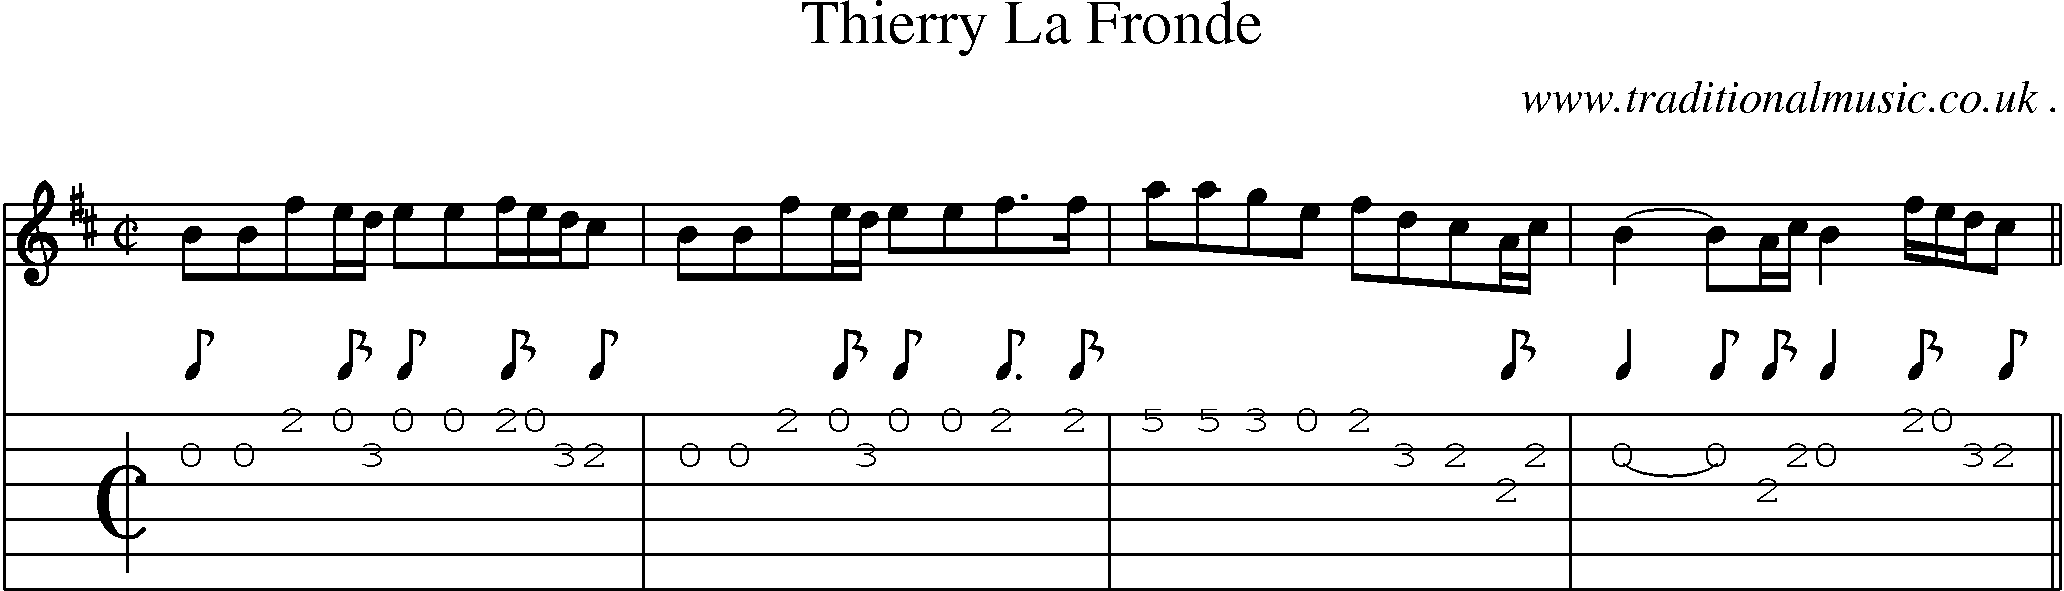 Sheet-Music and Guitar Tabs for Thierry La Fronde